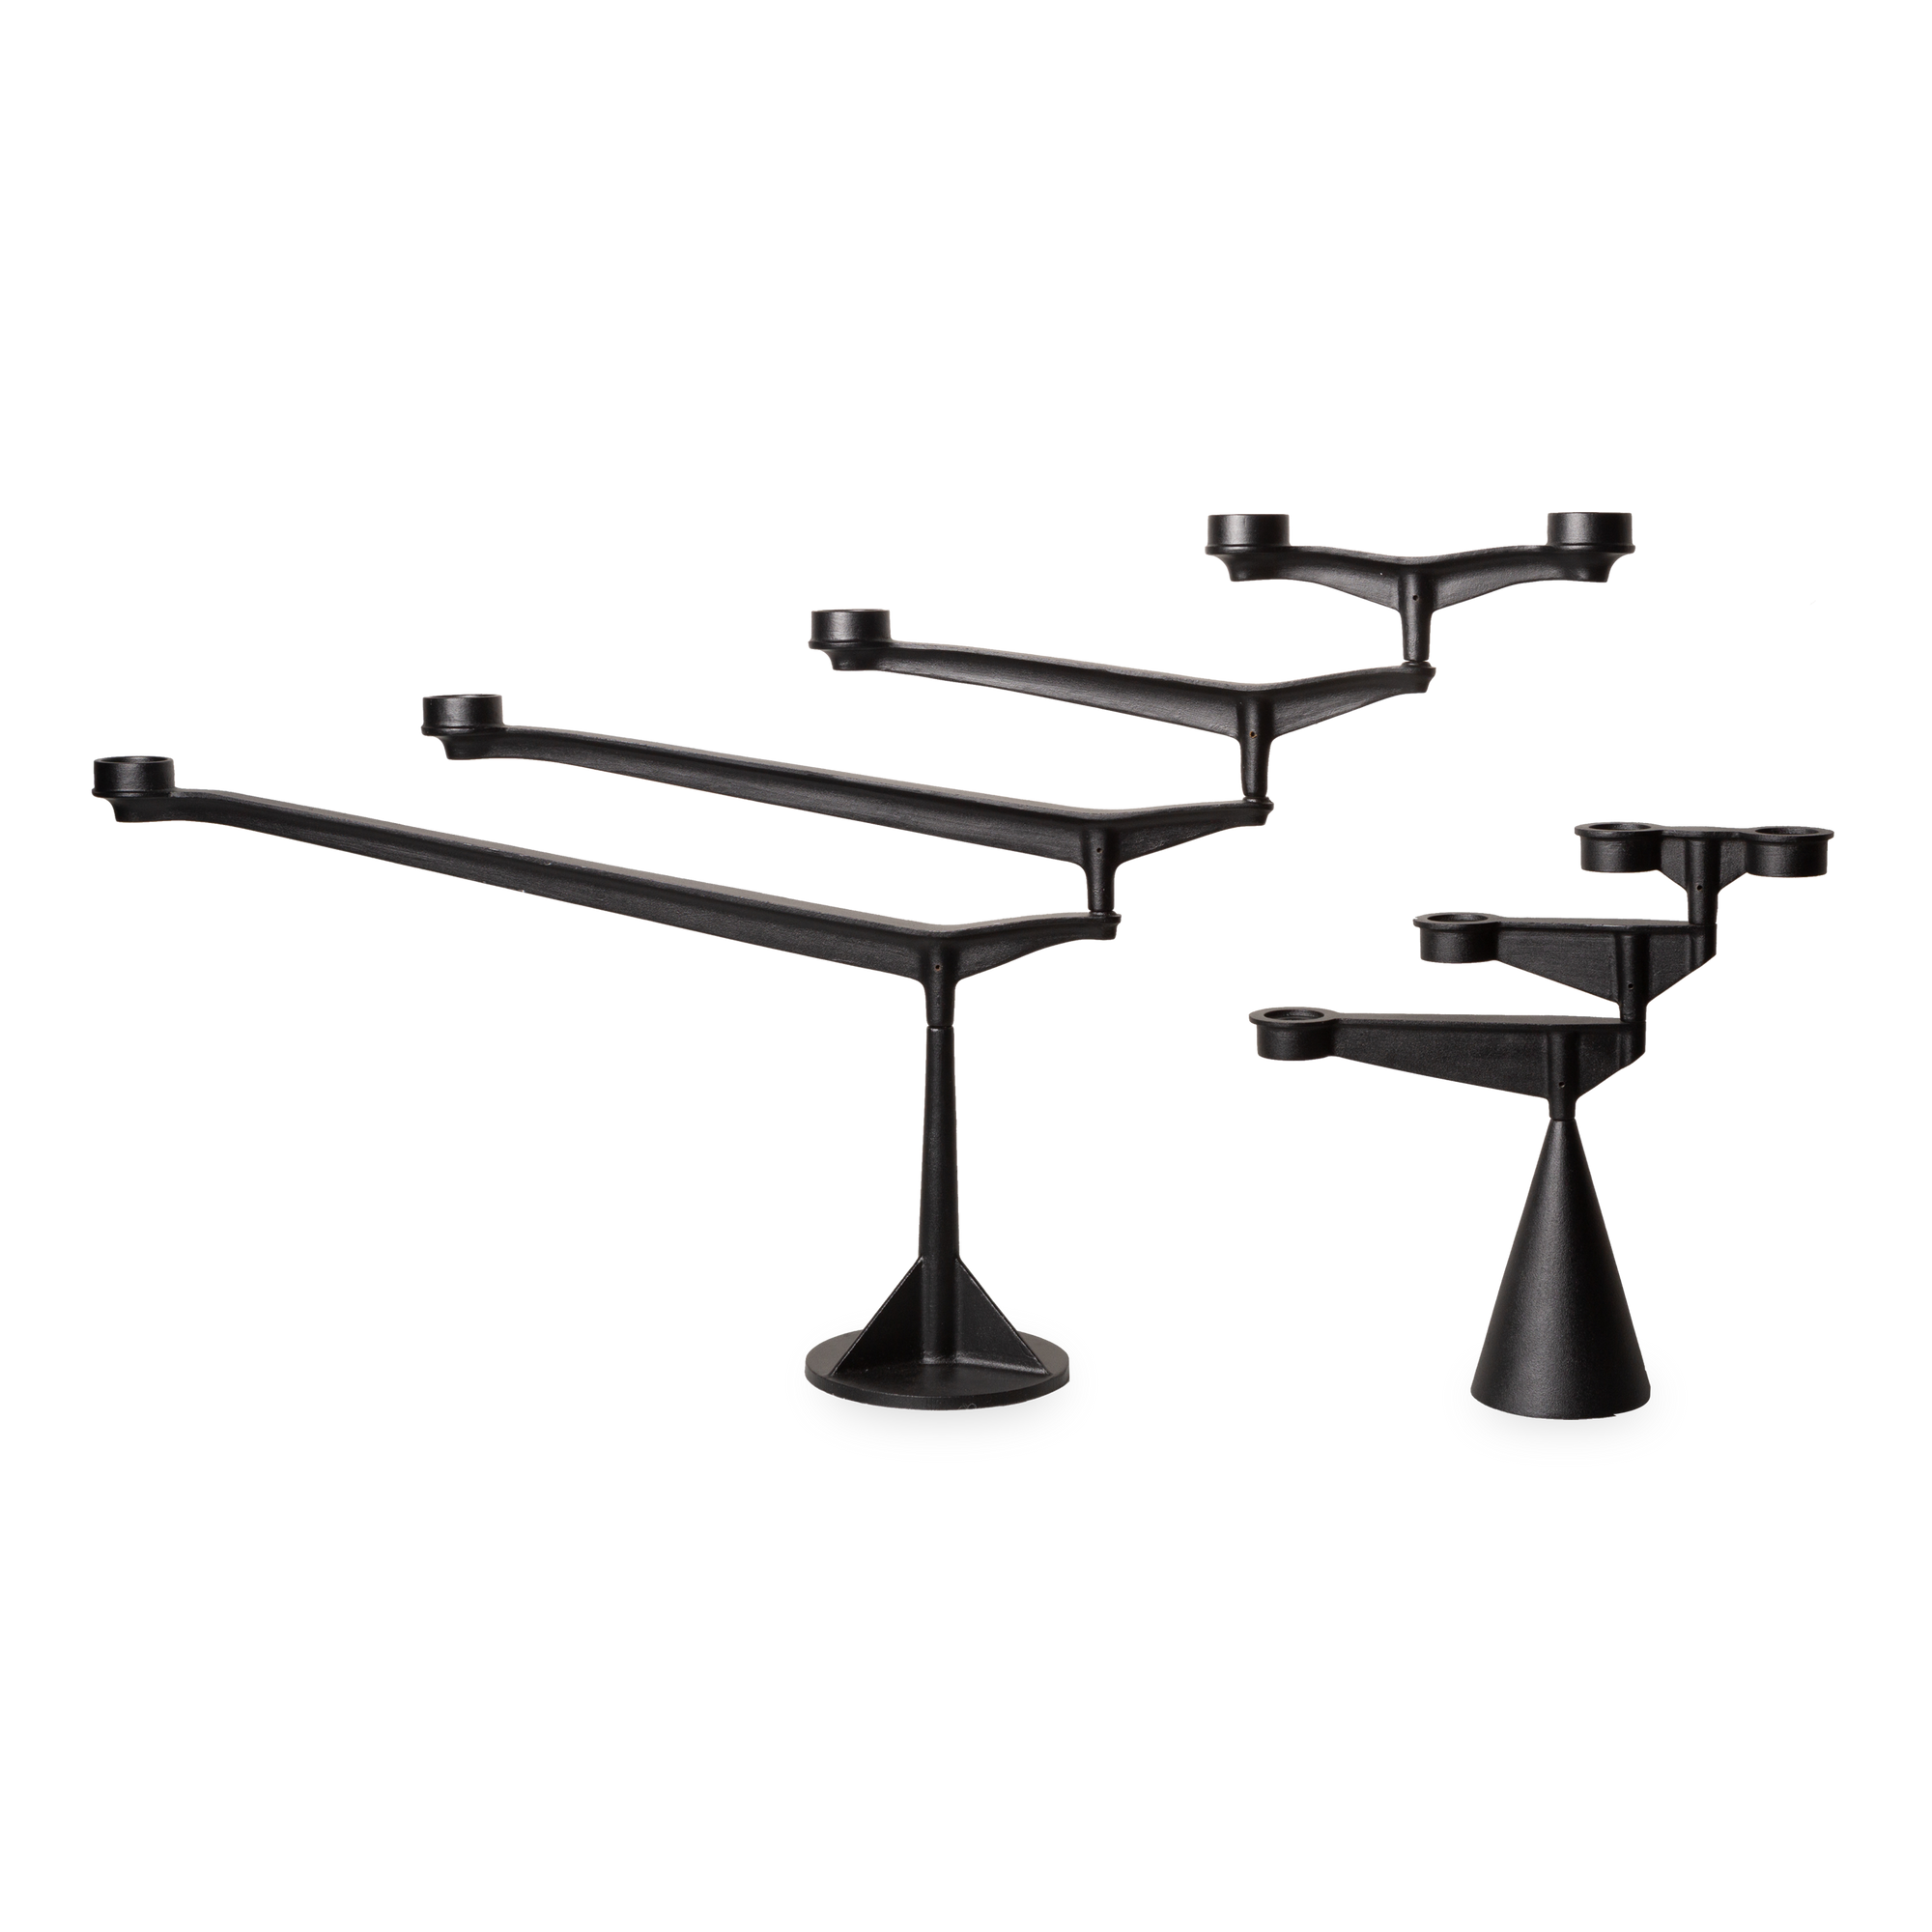 The Spin Candleholders are an industrial-strength piece of table-top engineering designed to act as a kinetic centerpiece and produce infinite arrangements.